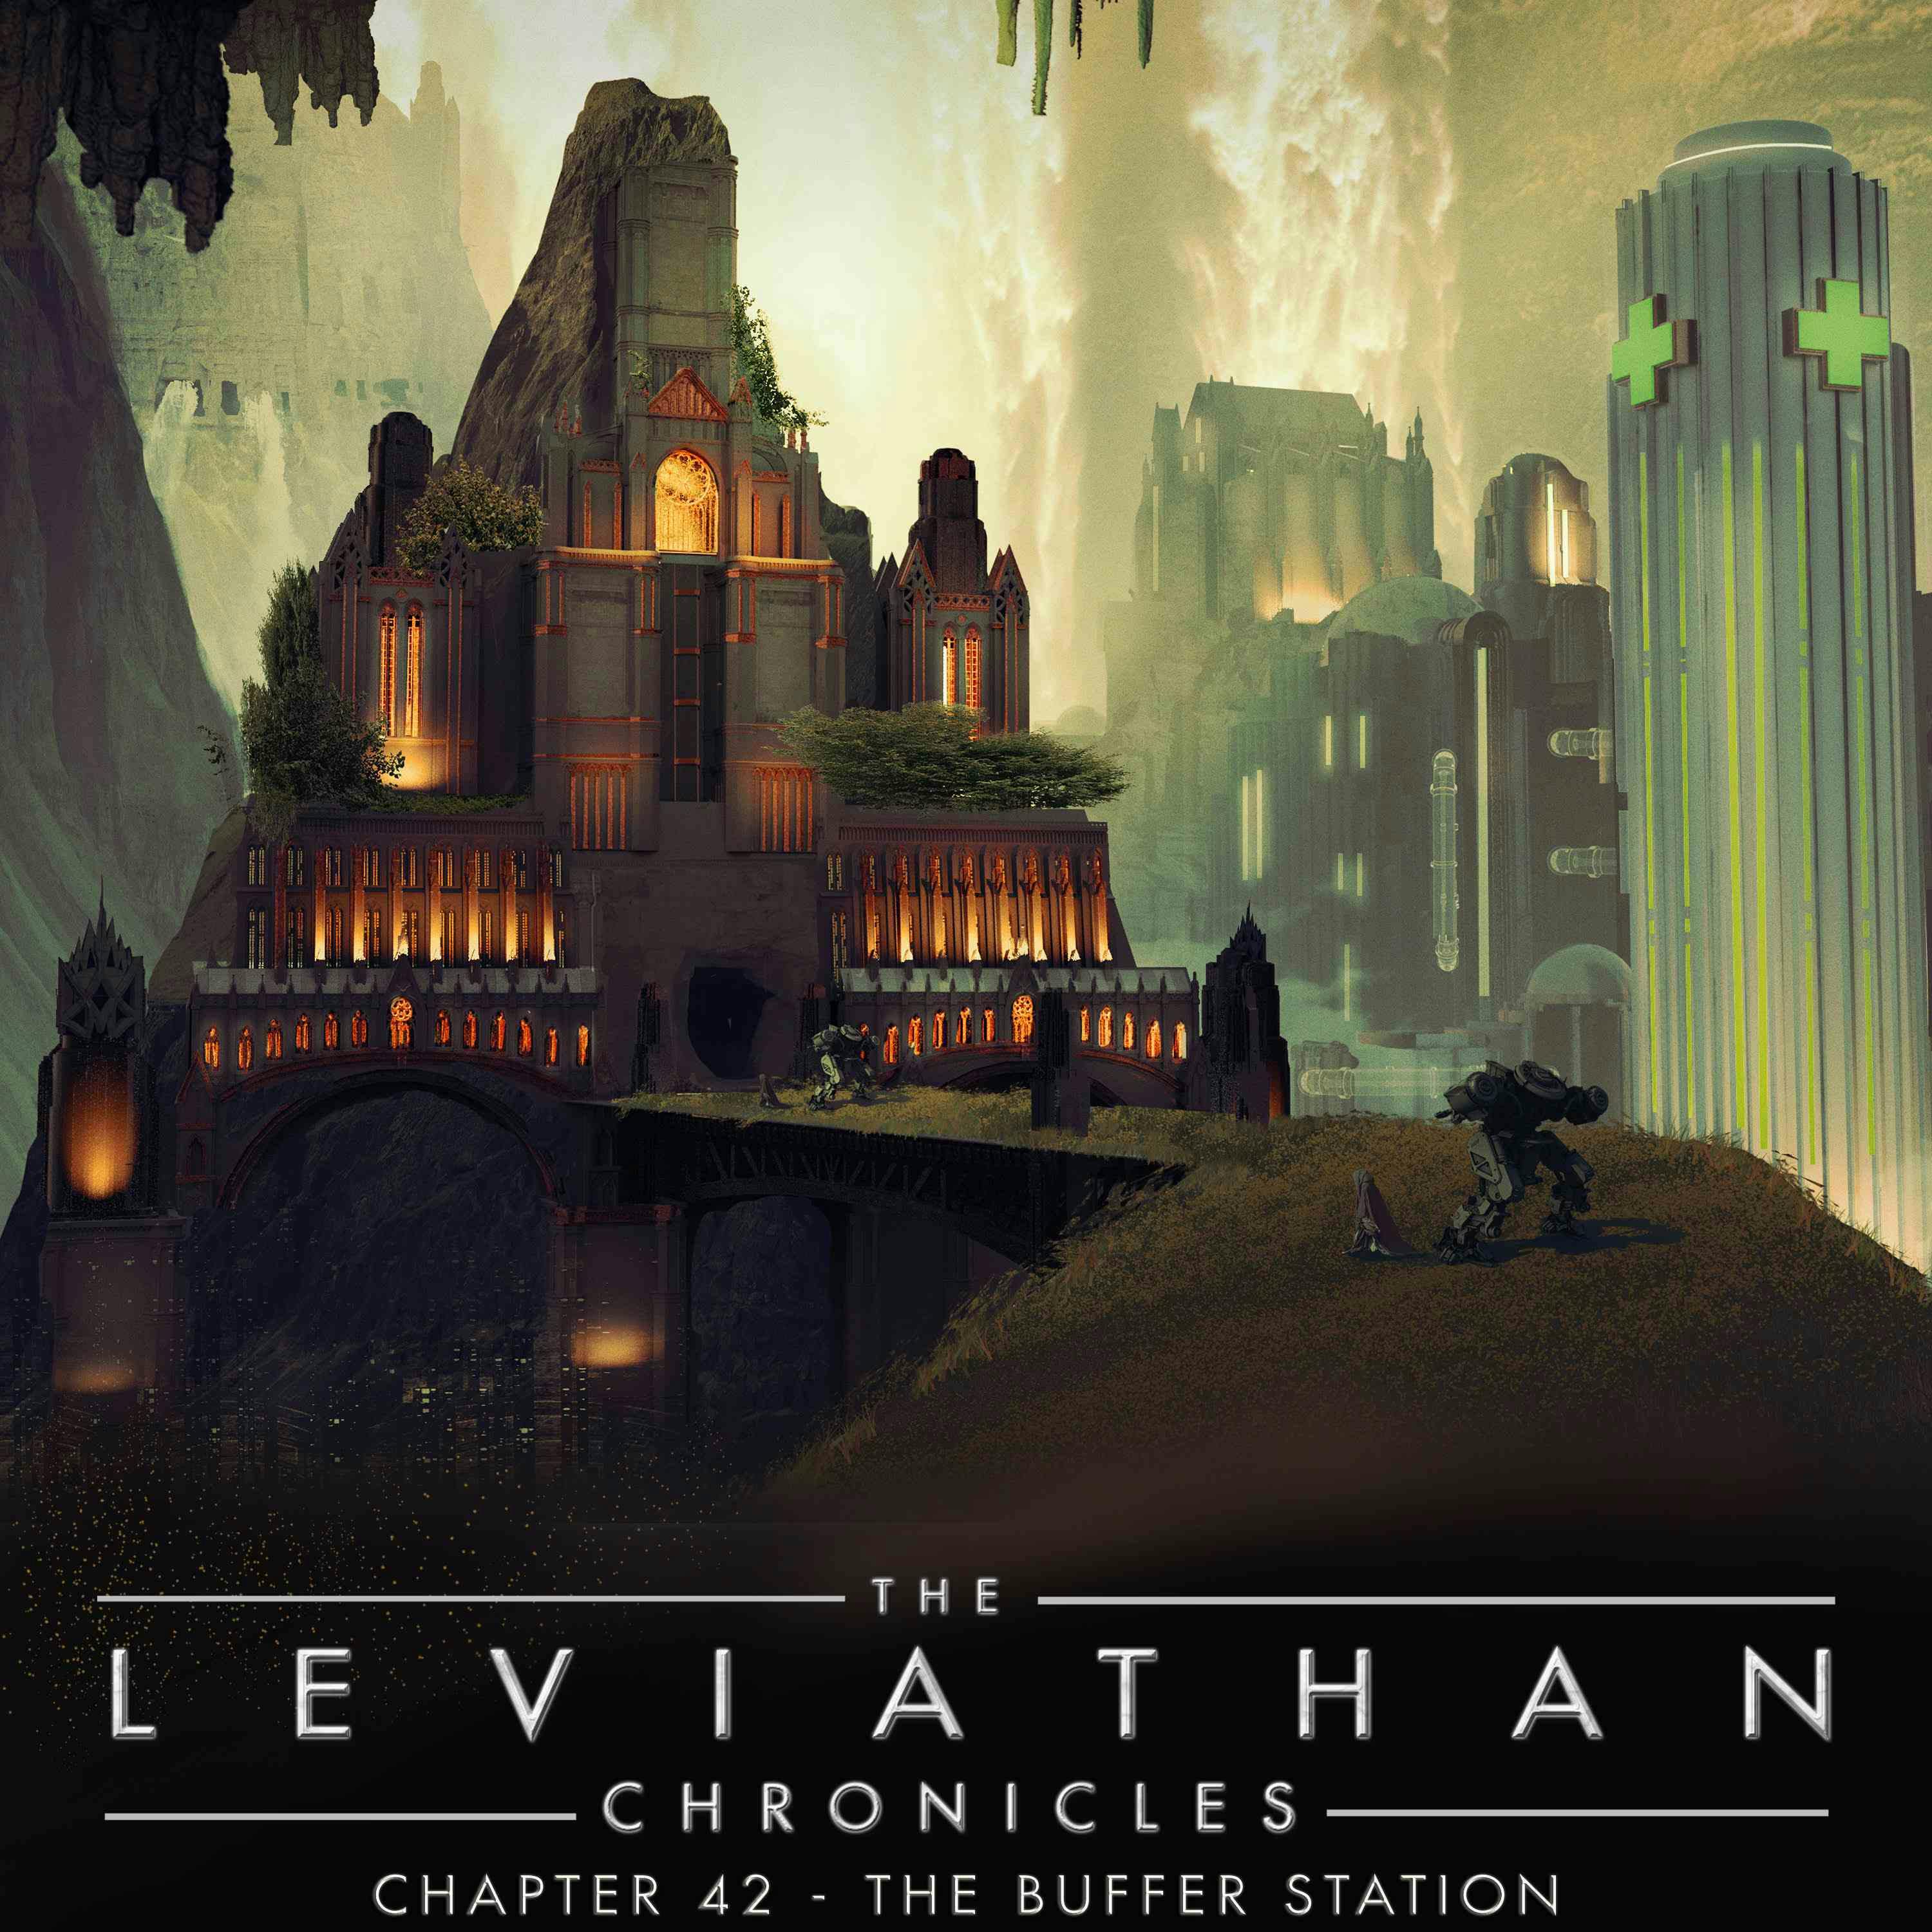 The Leviathan Chronicles | Chapter 42 - The Buffer Station